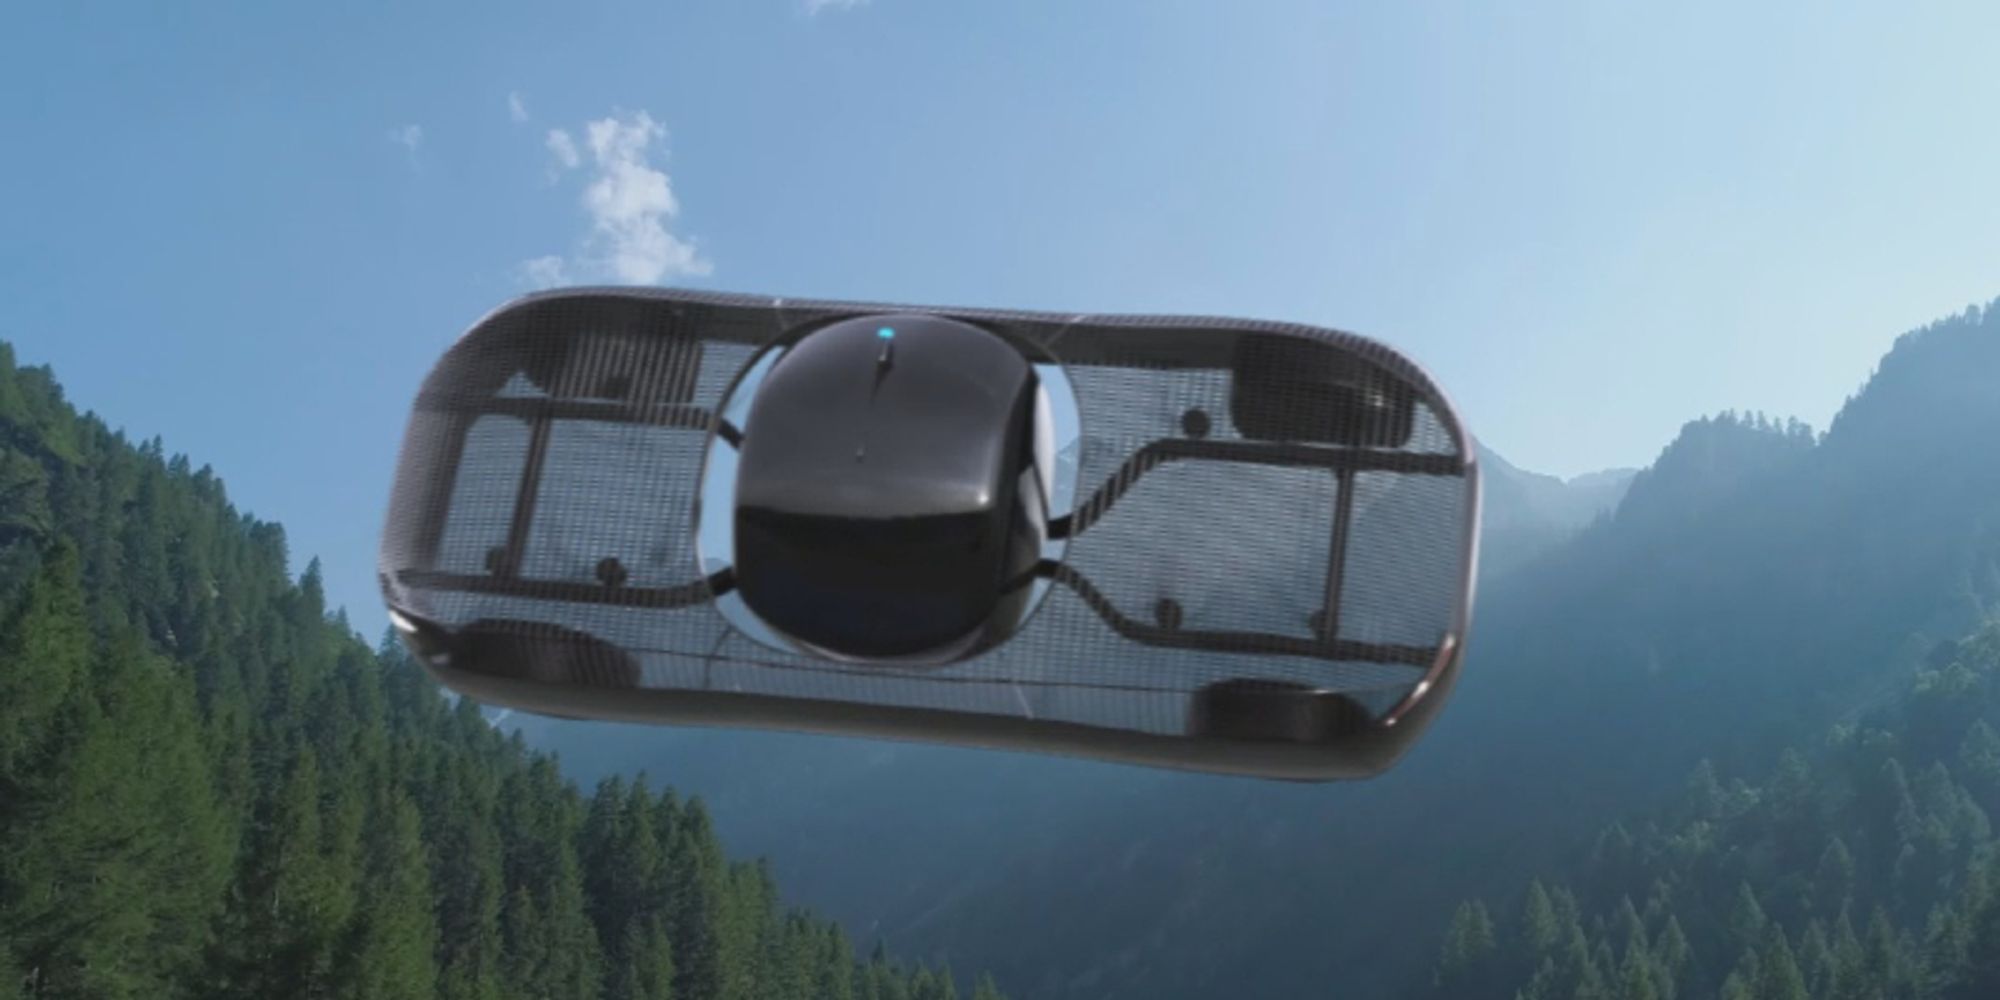 Alef Aeronautics' flying car with street driving and vertical take-off ability impresses Tesla investors — TFN